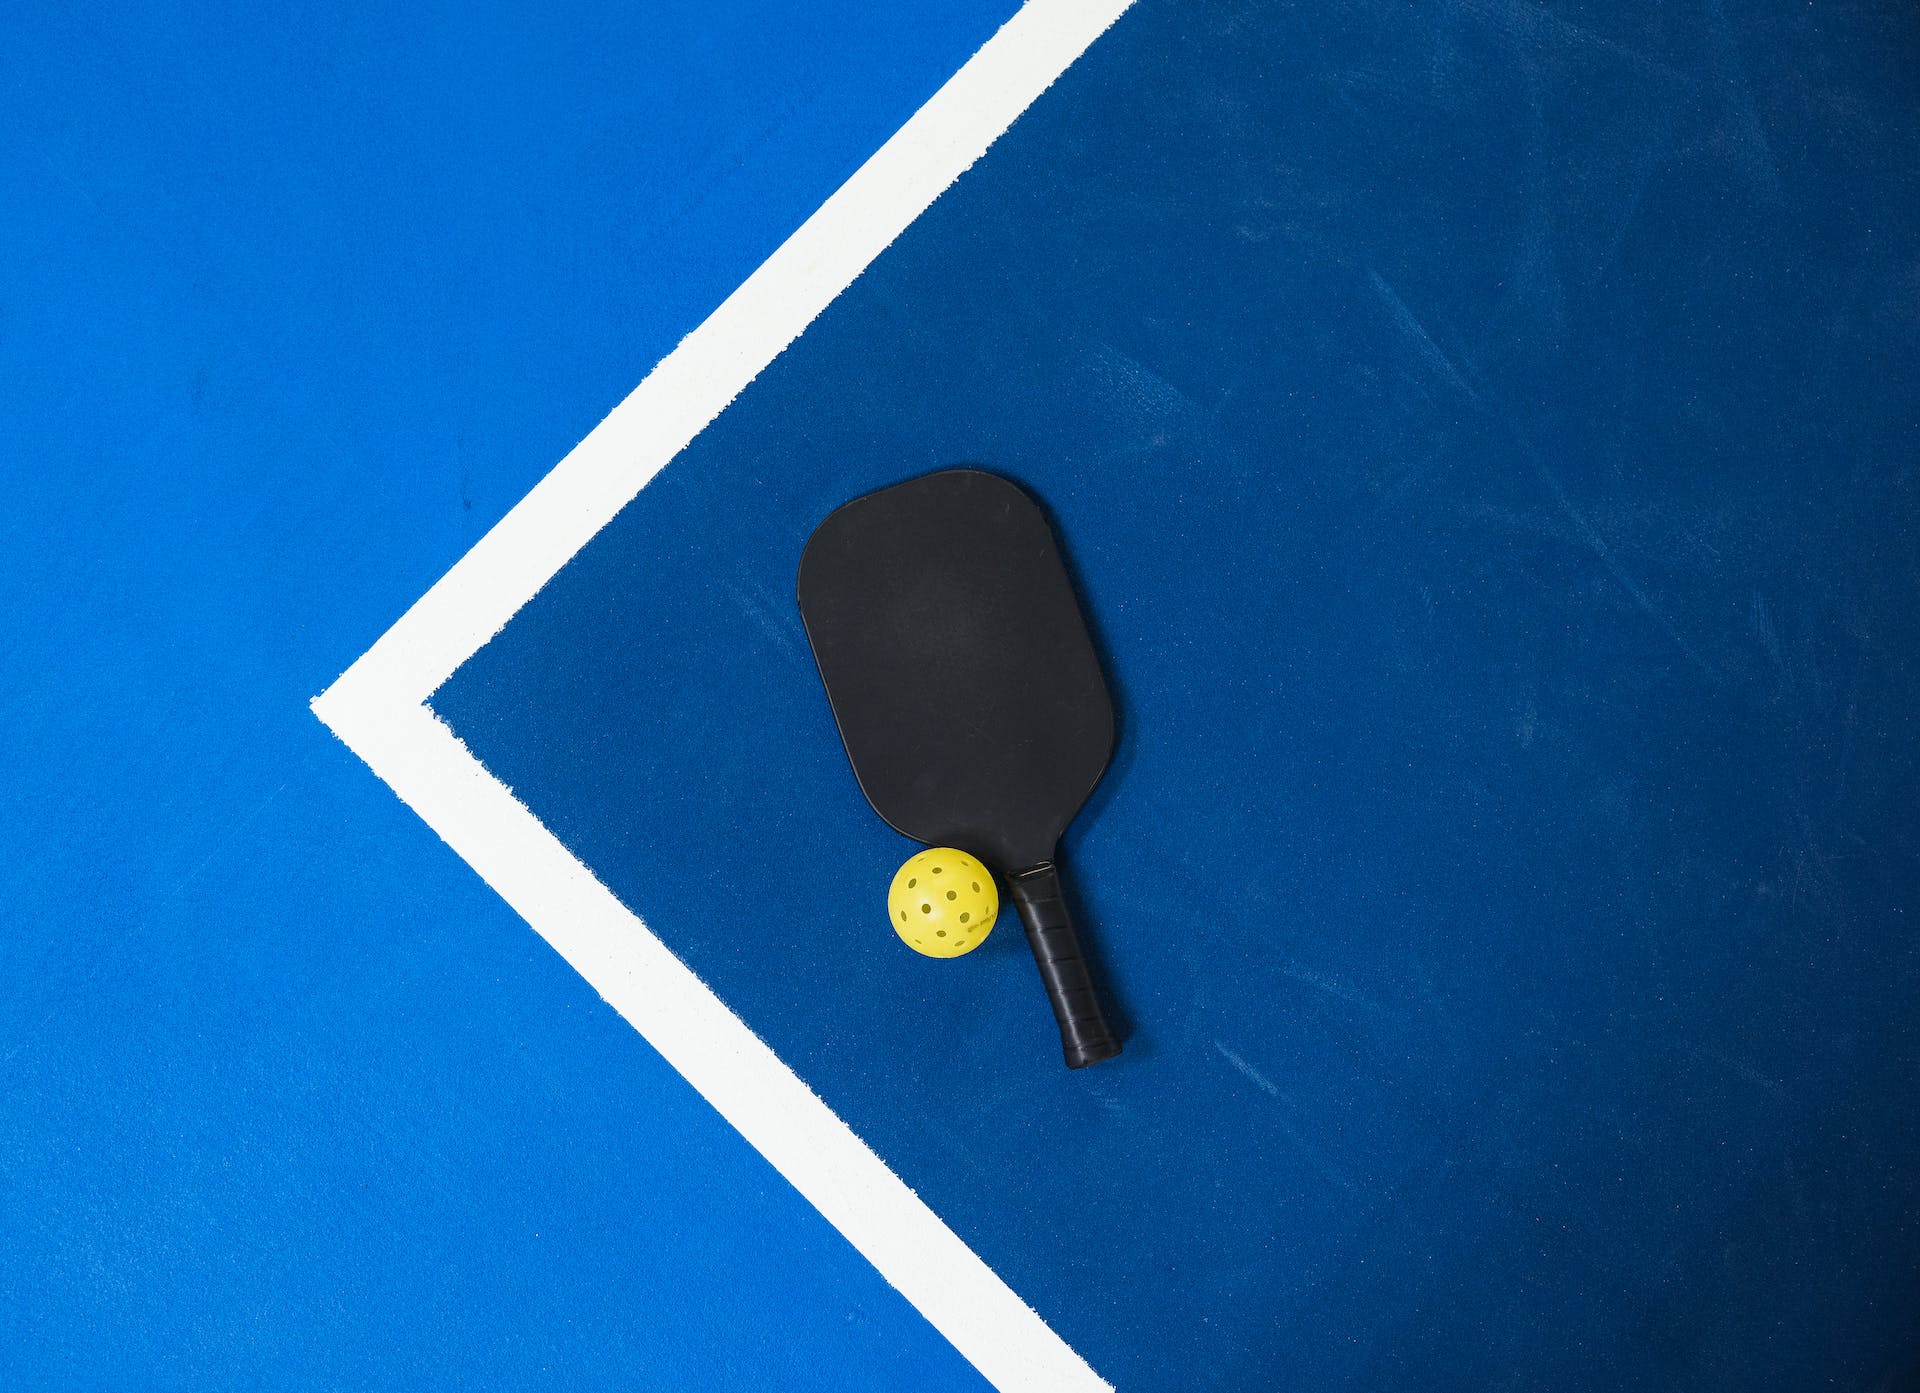 Paddle and ball on pickleball court